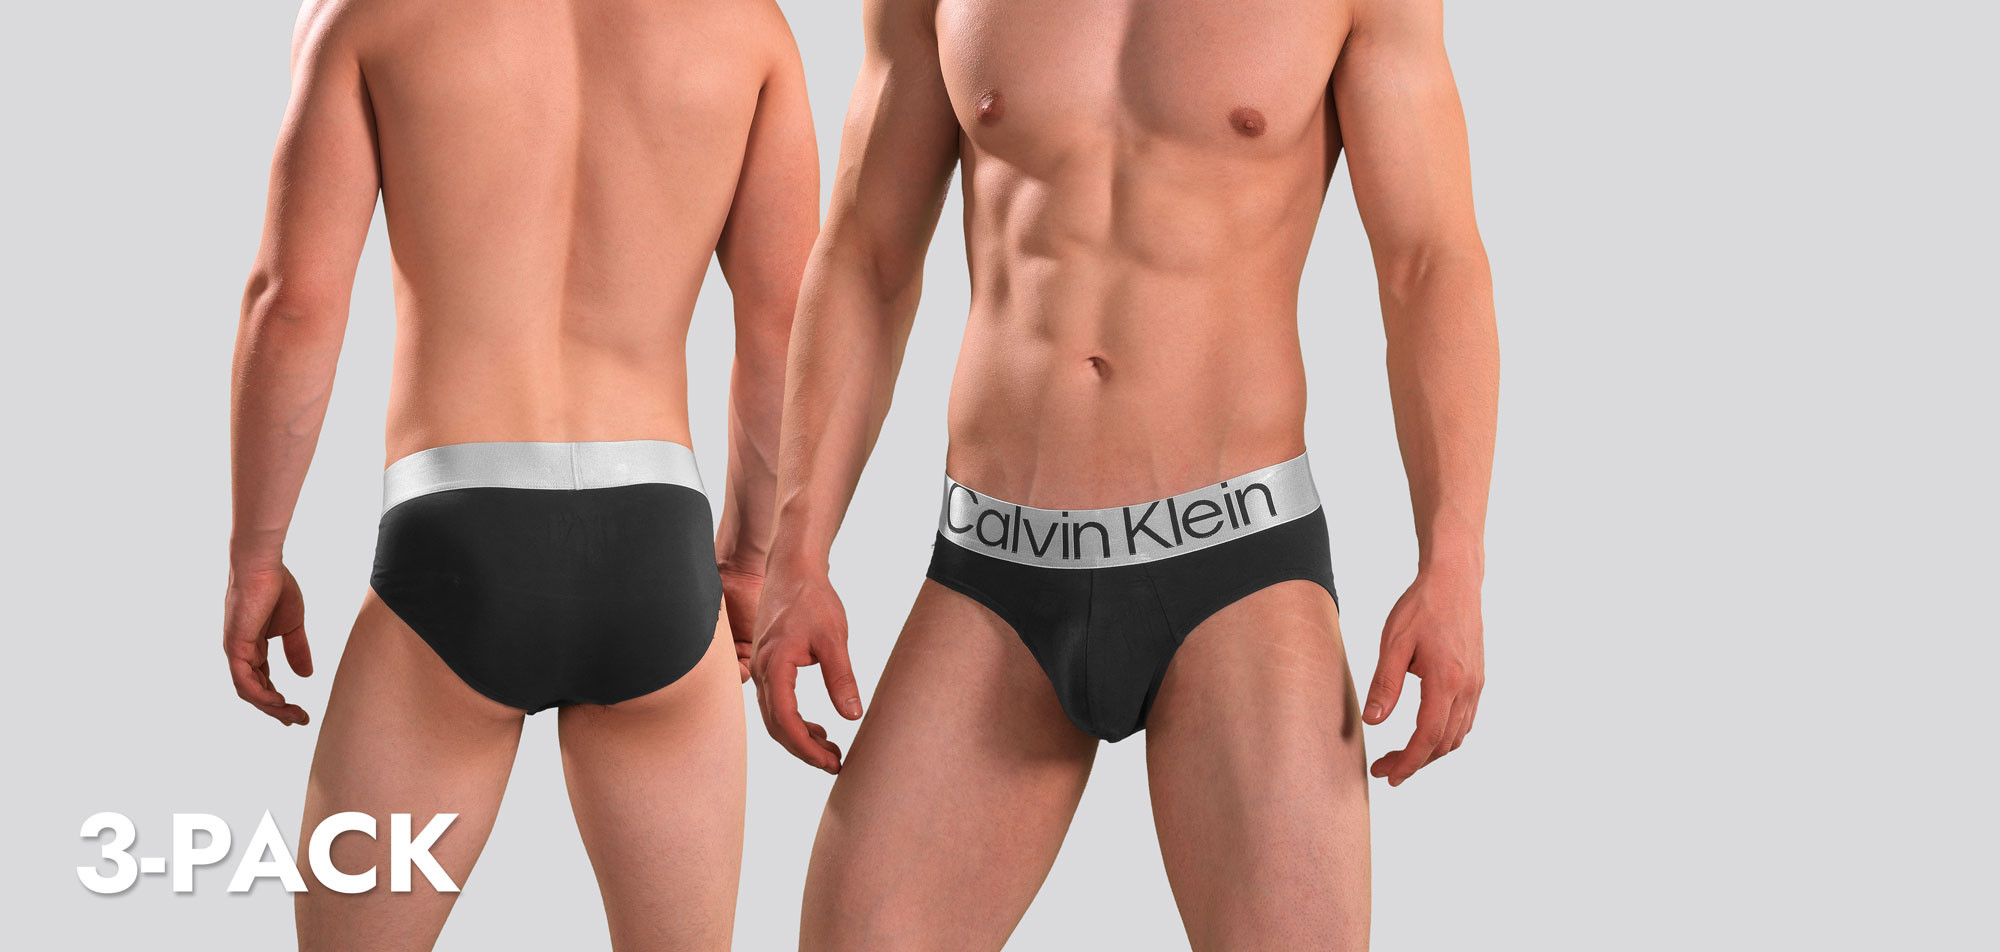 Calvin Klein Hip Brief 3-Pack NB3129A Reconsidered Steel, color Nee